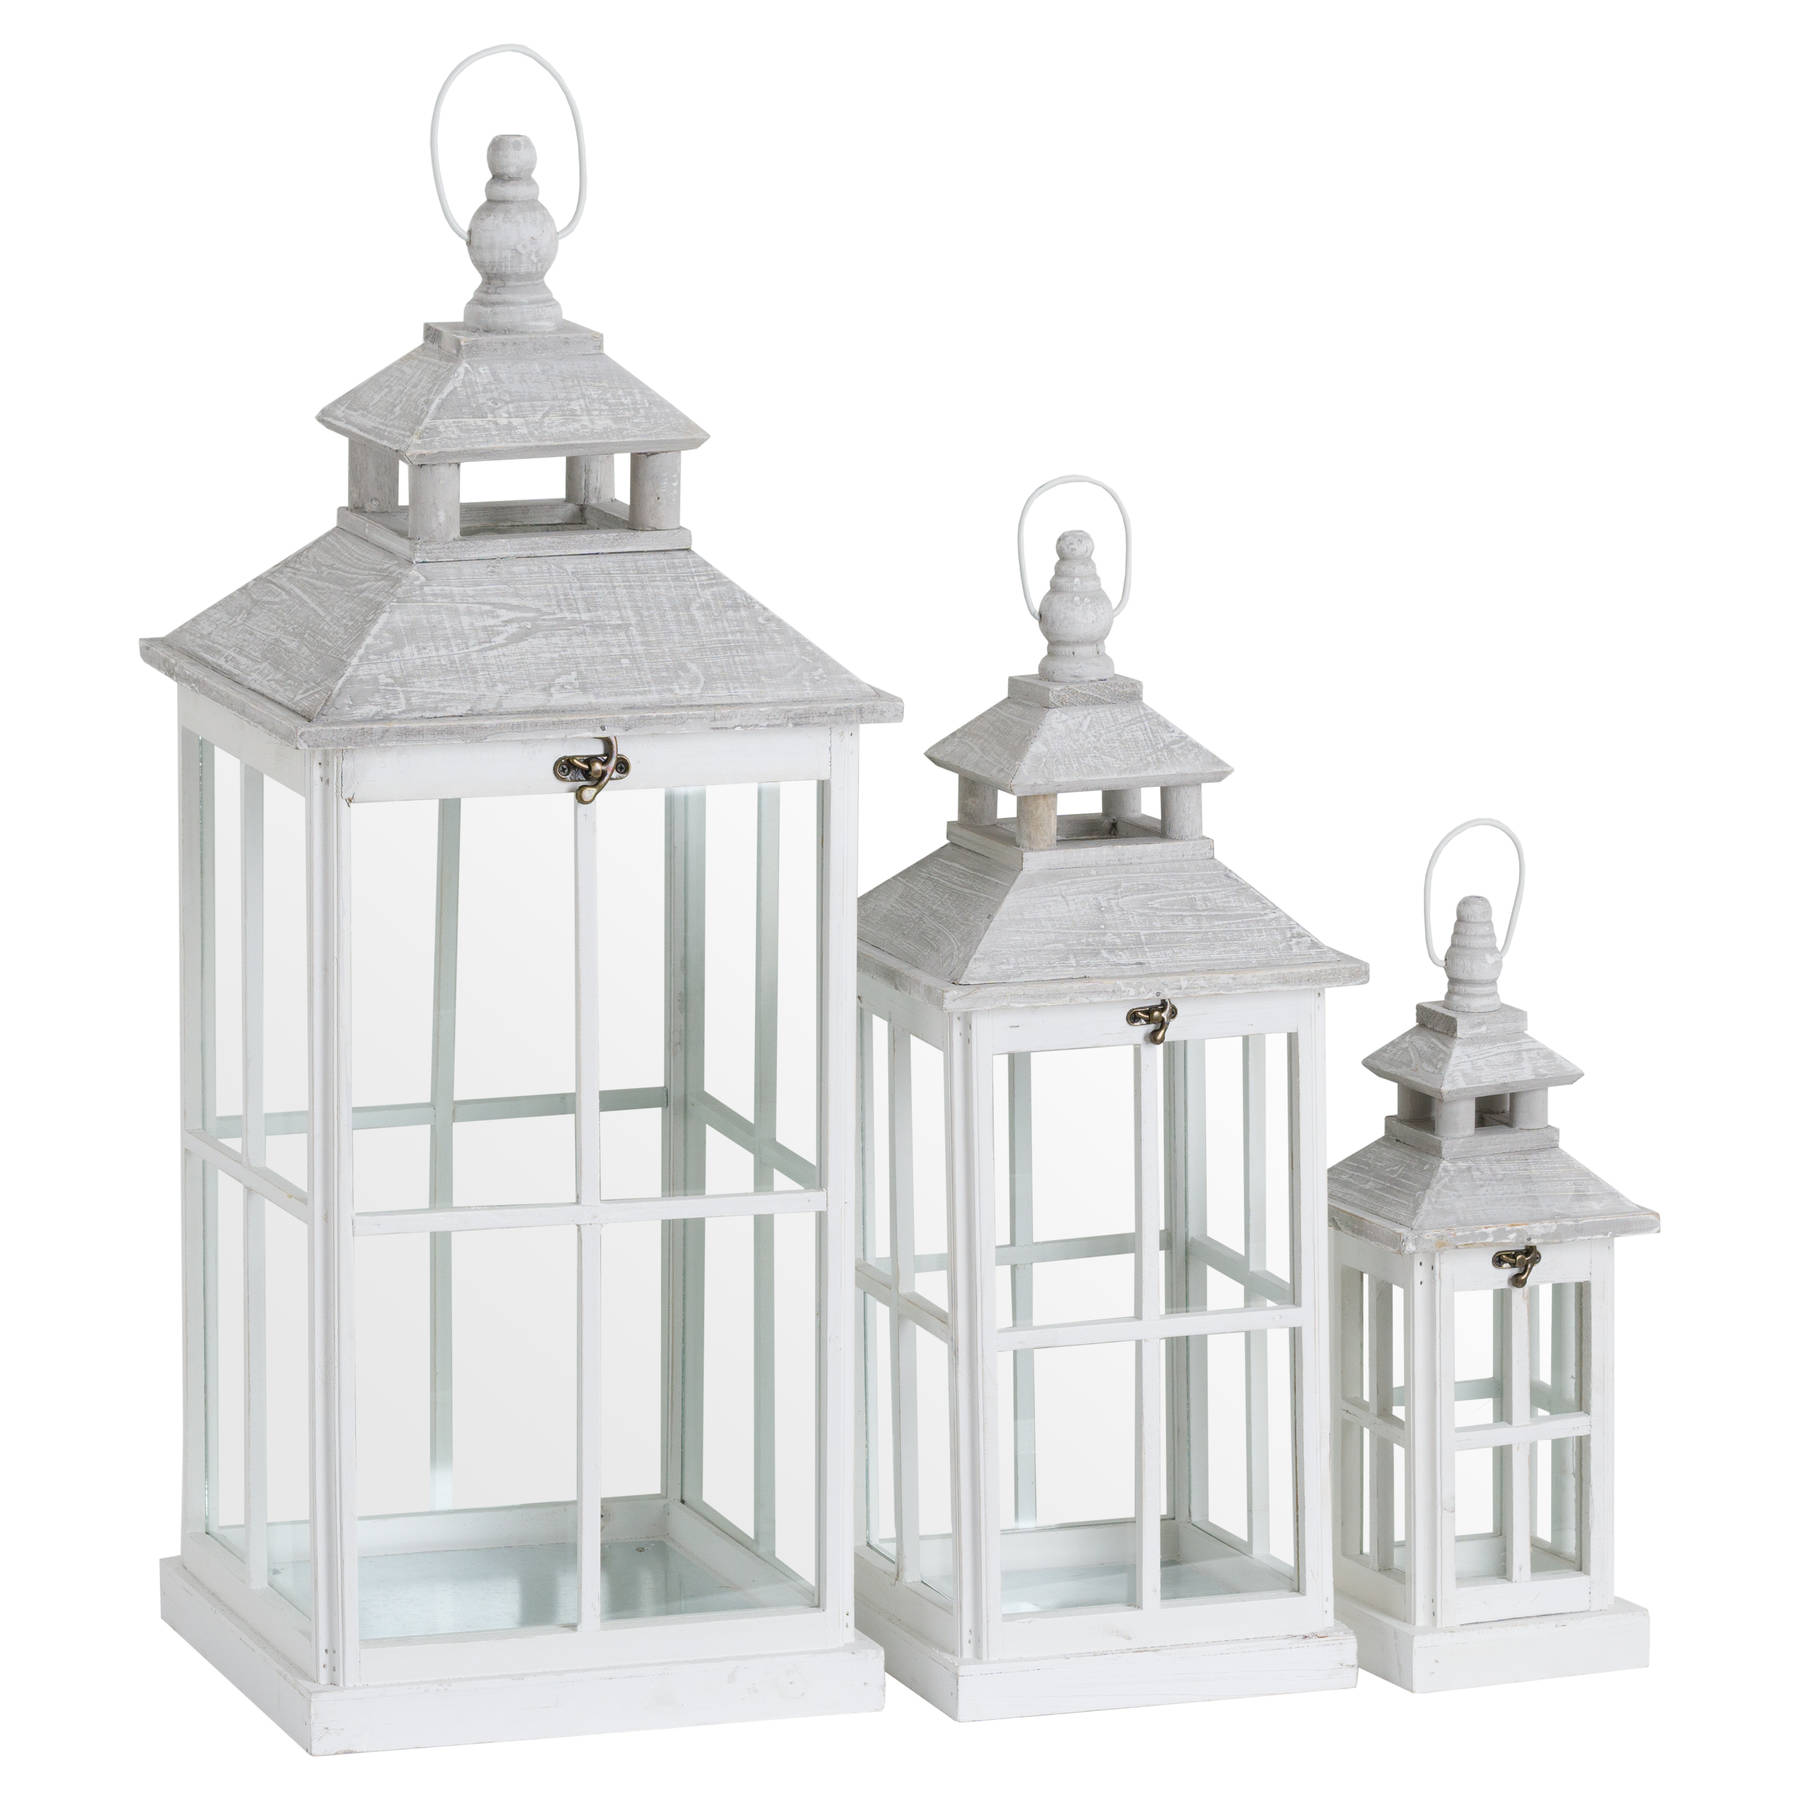 Set Of 3 White Window Style Lanterns With Open Top - Image 1